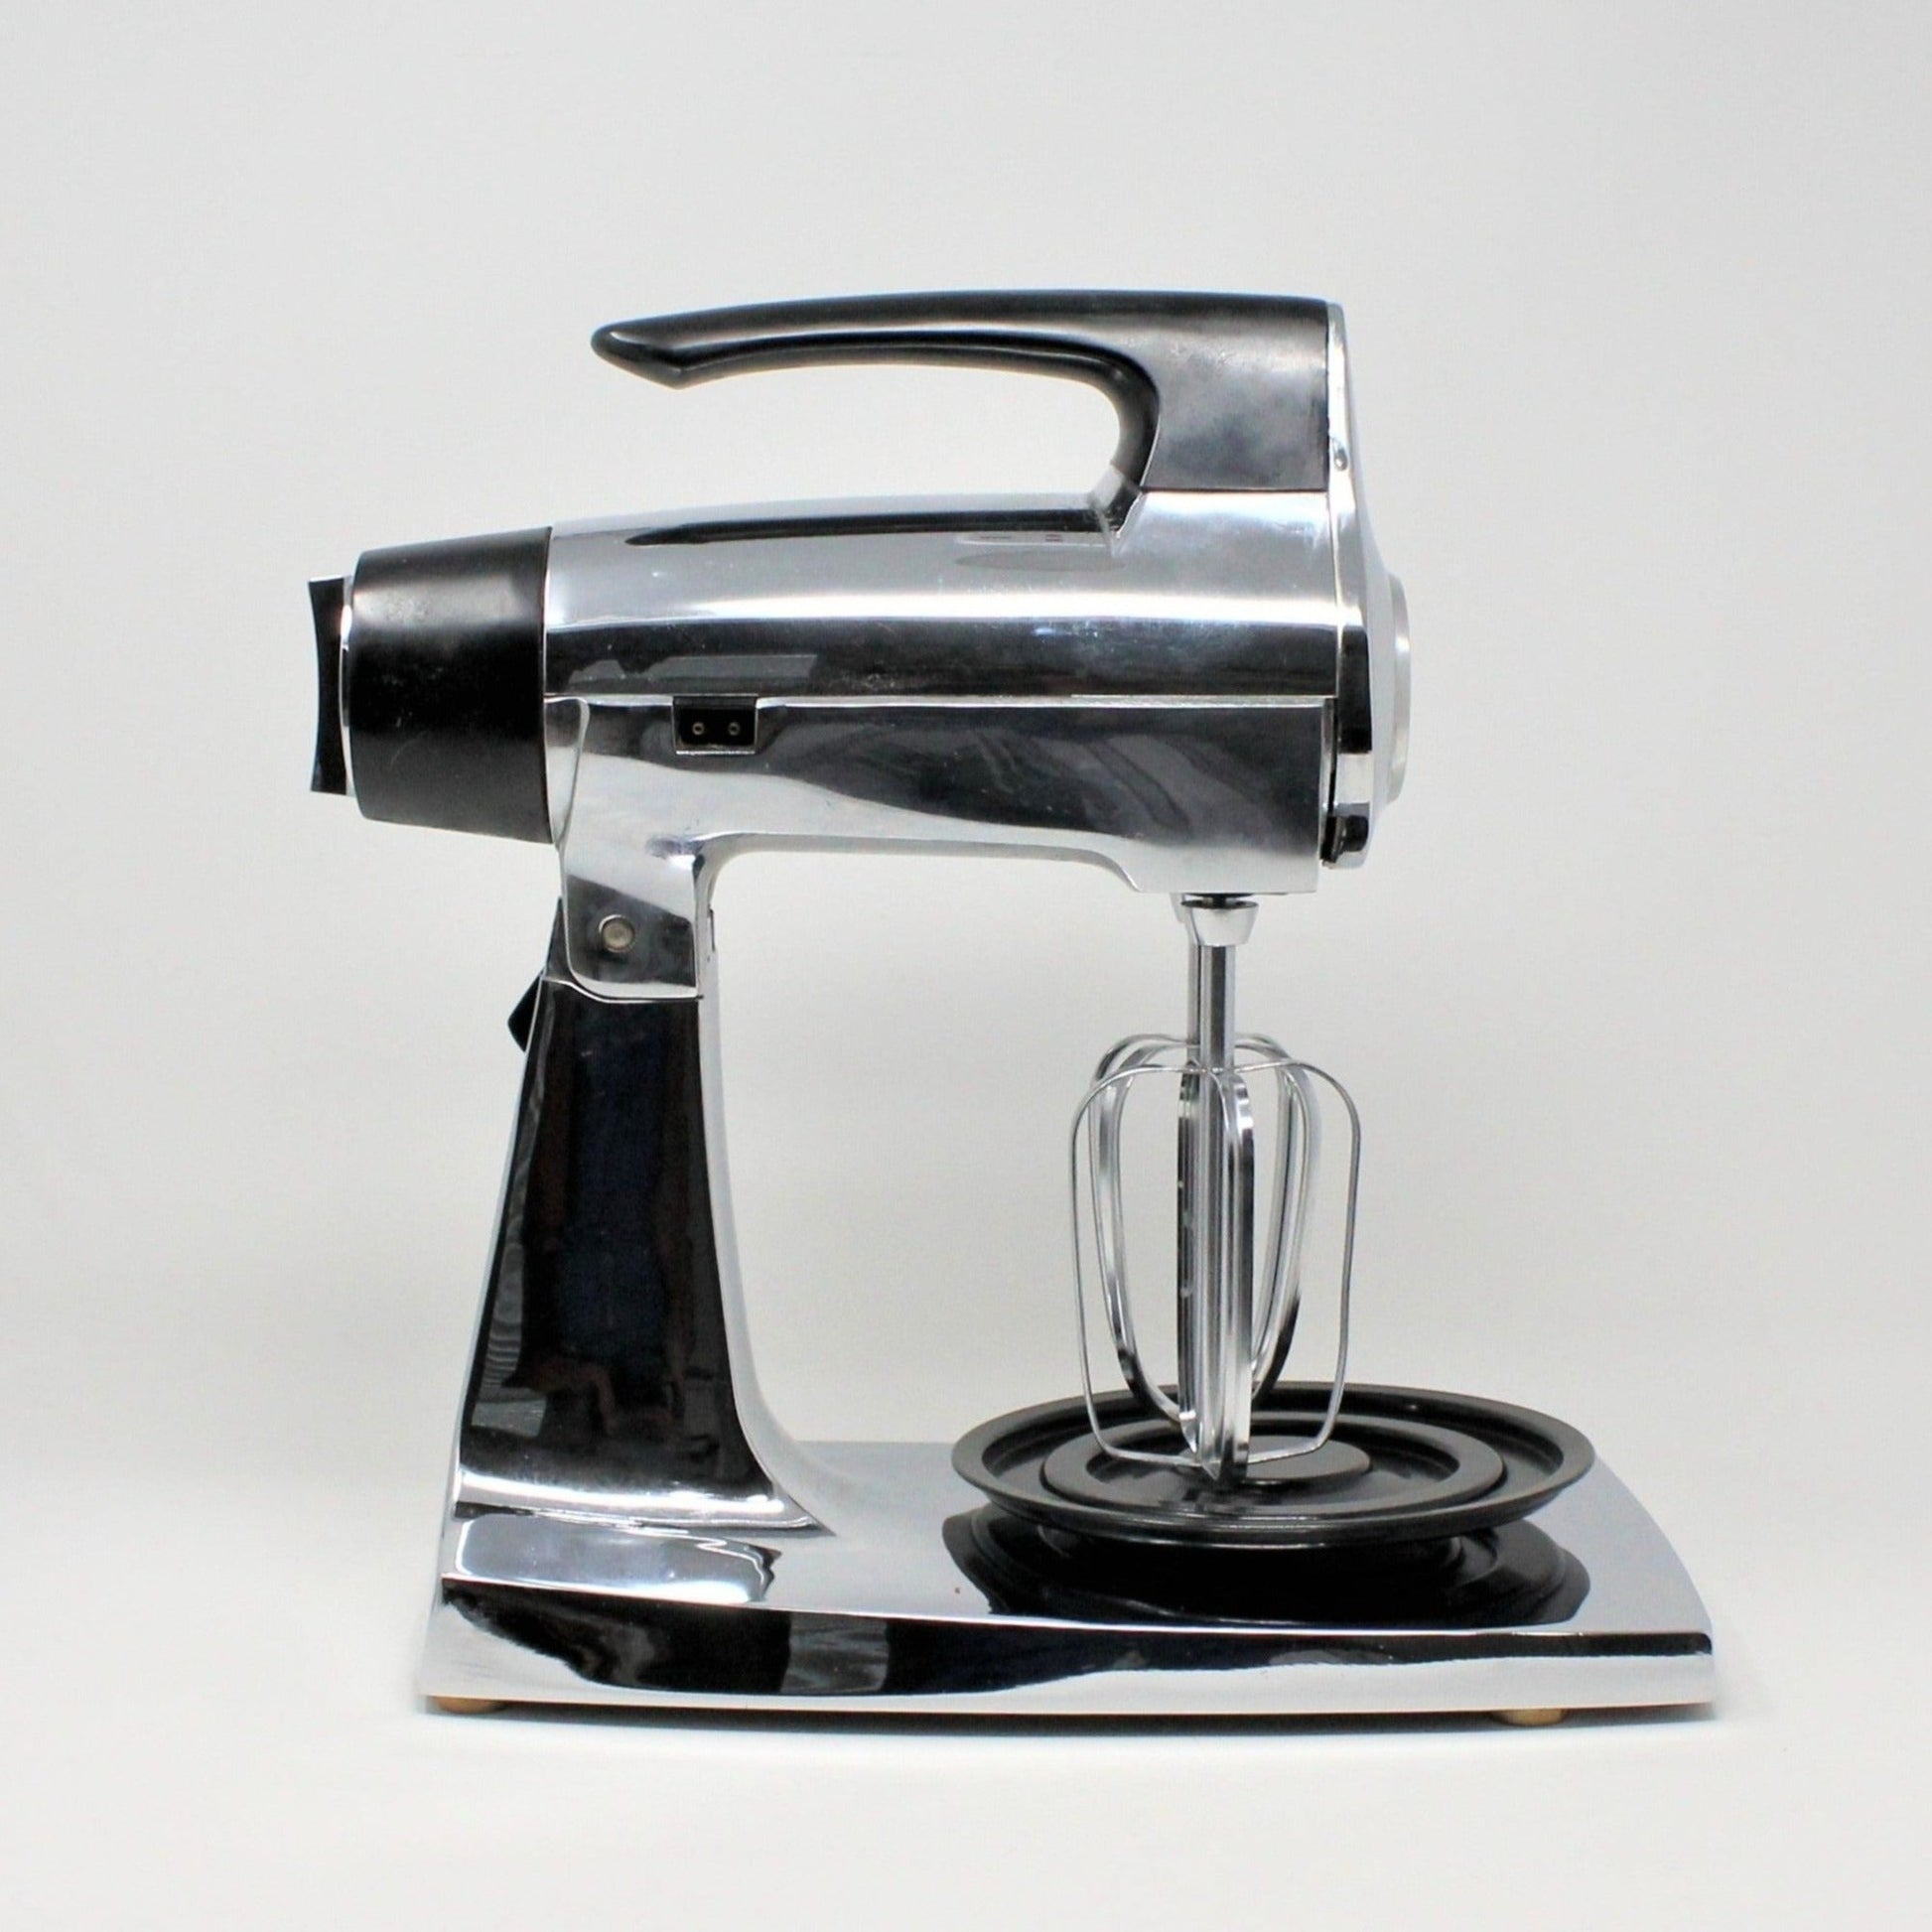 Vintage Sunbeam Stand Mixer 60th Anniversary Limited Edition for